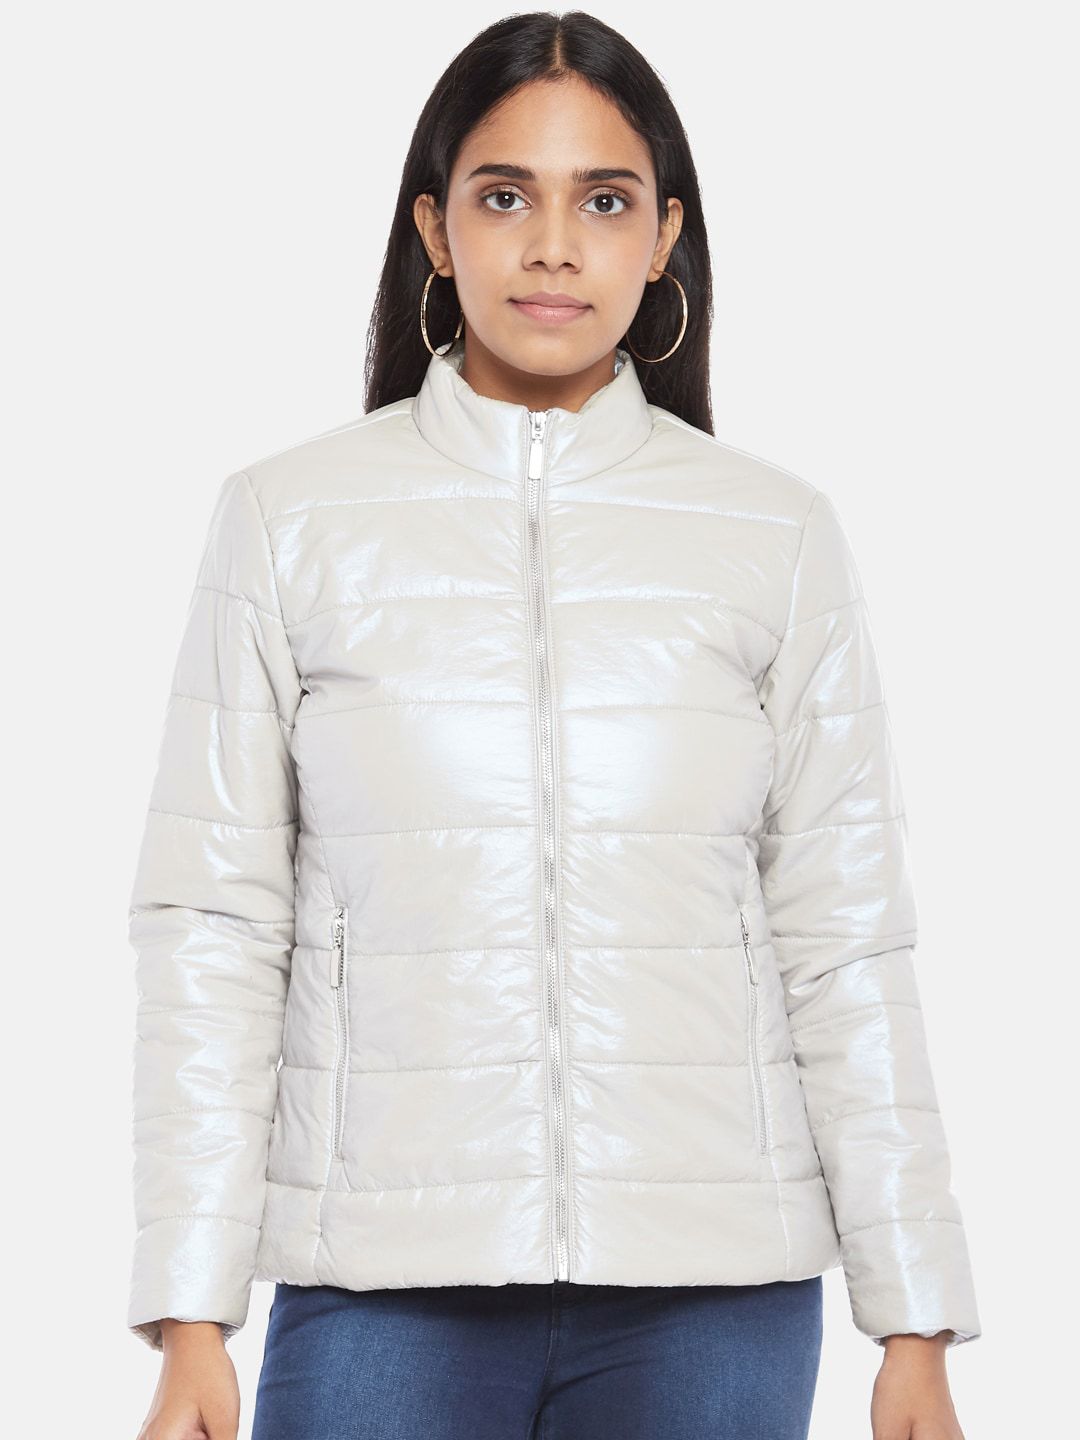 Honey by Pantaloons Women Silver-Toned Crop Puffer Jacket Price in India